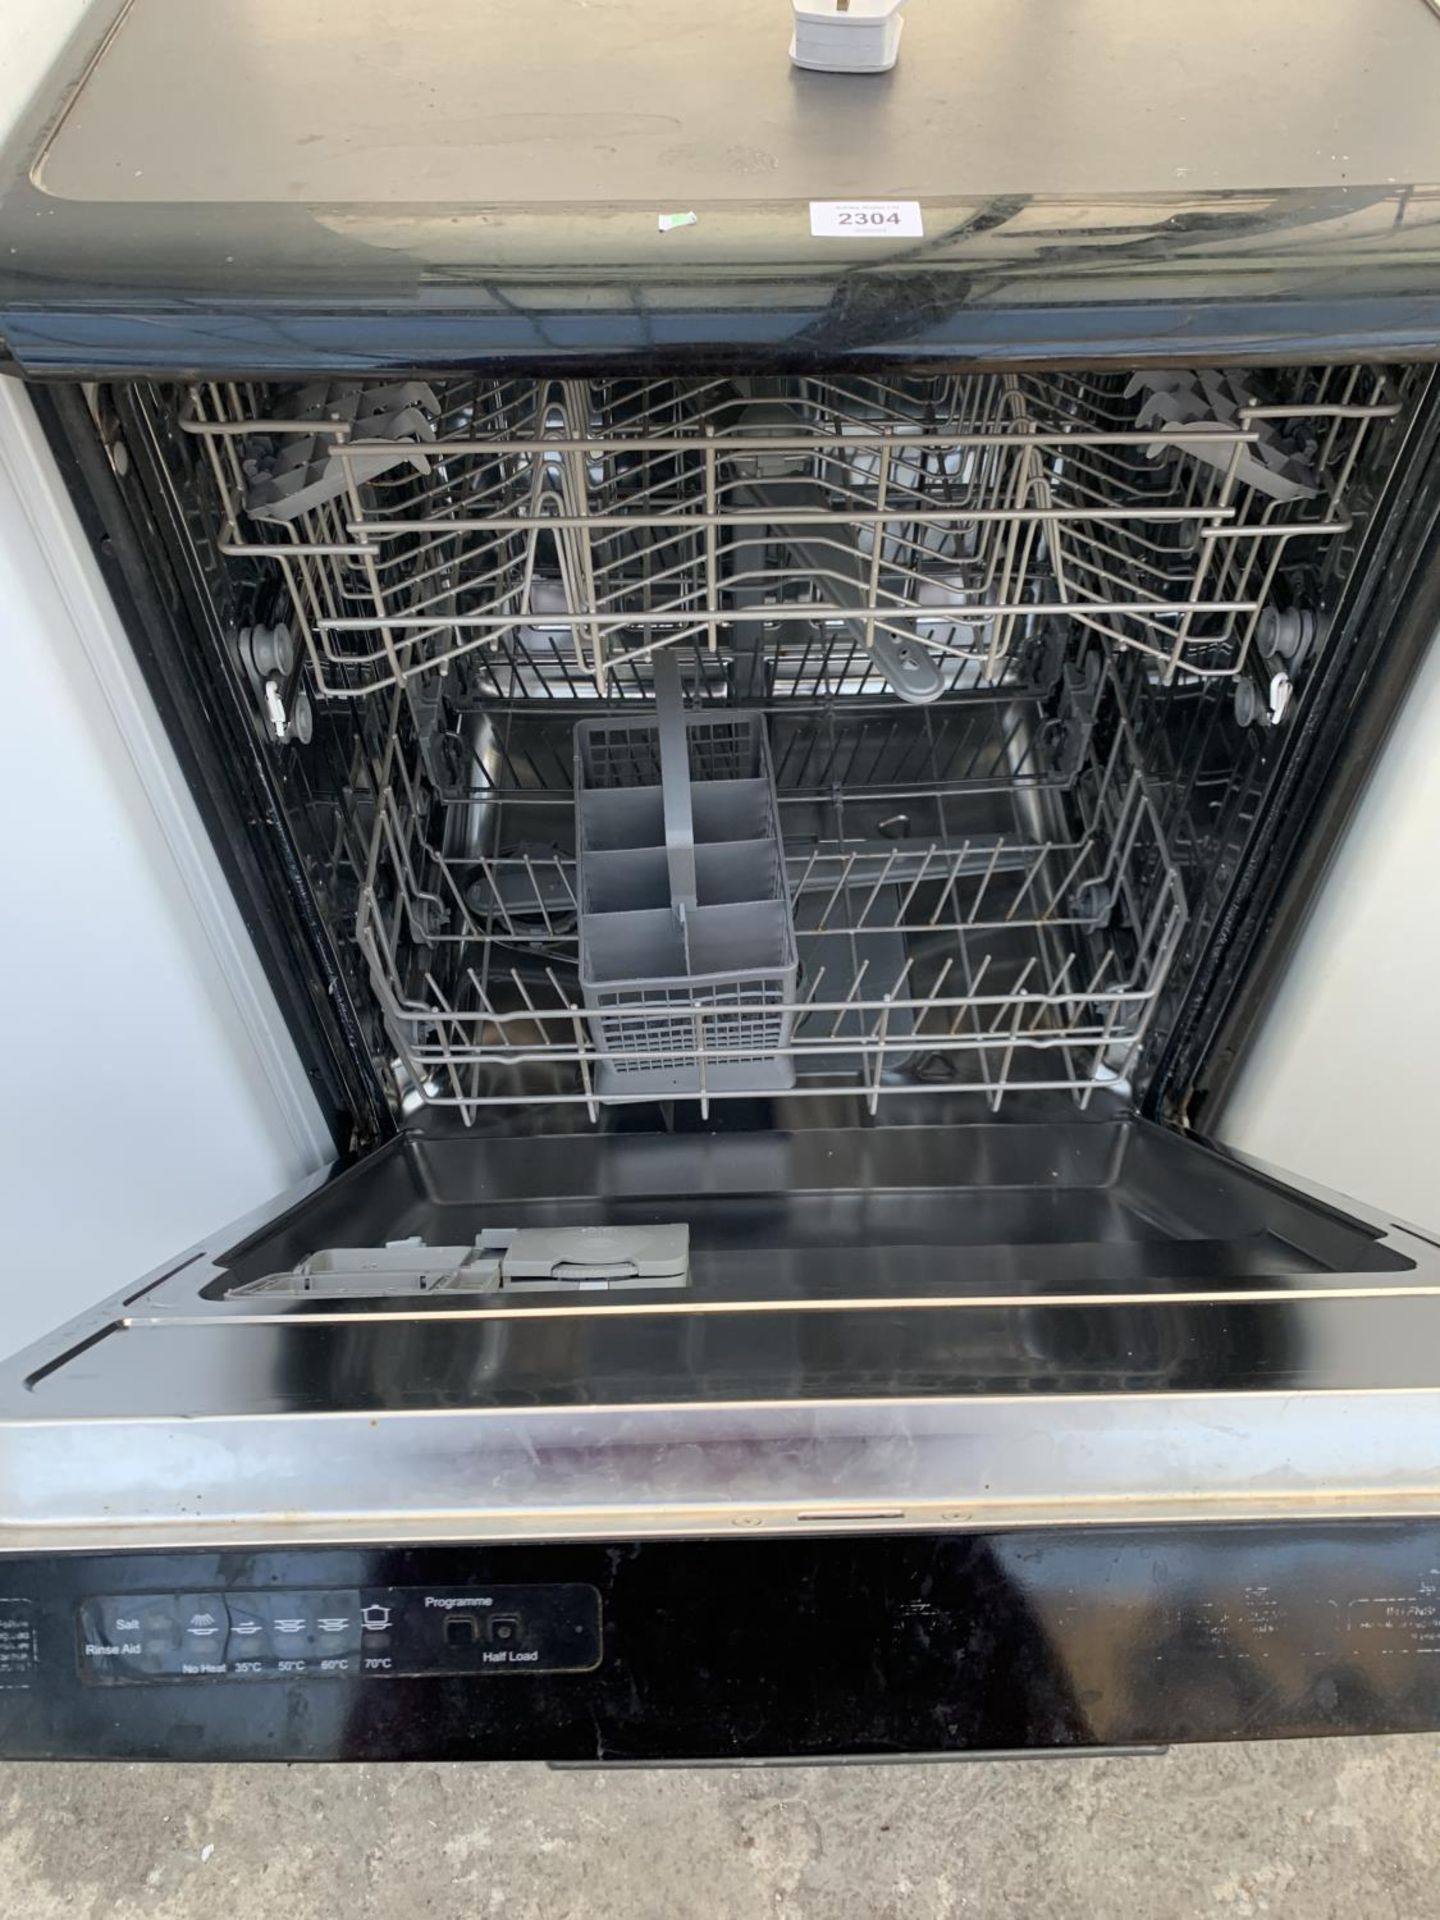 A BLACK UNDERCOUNTER DISH WASHER - Image 2 of 2